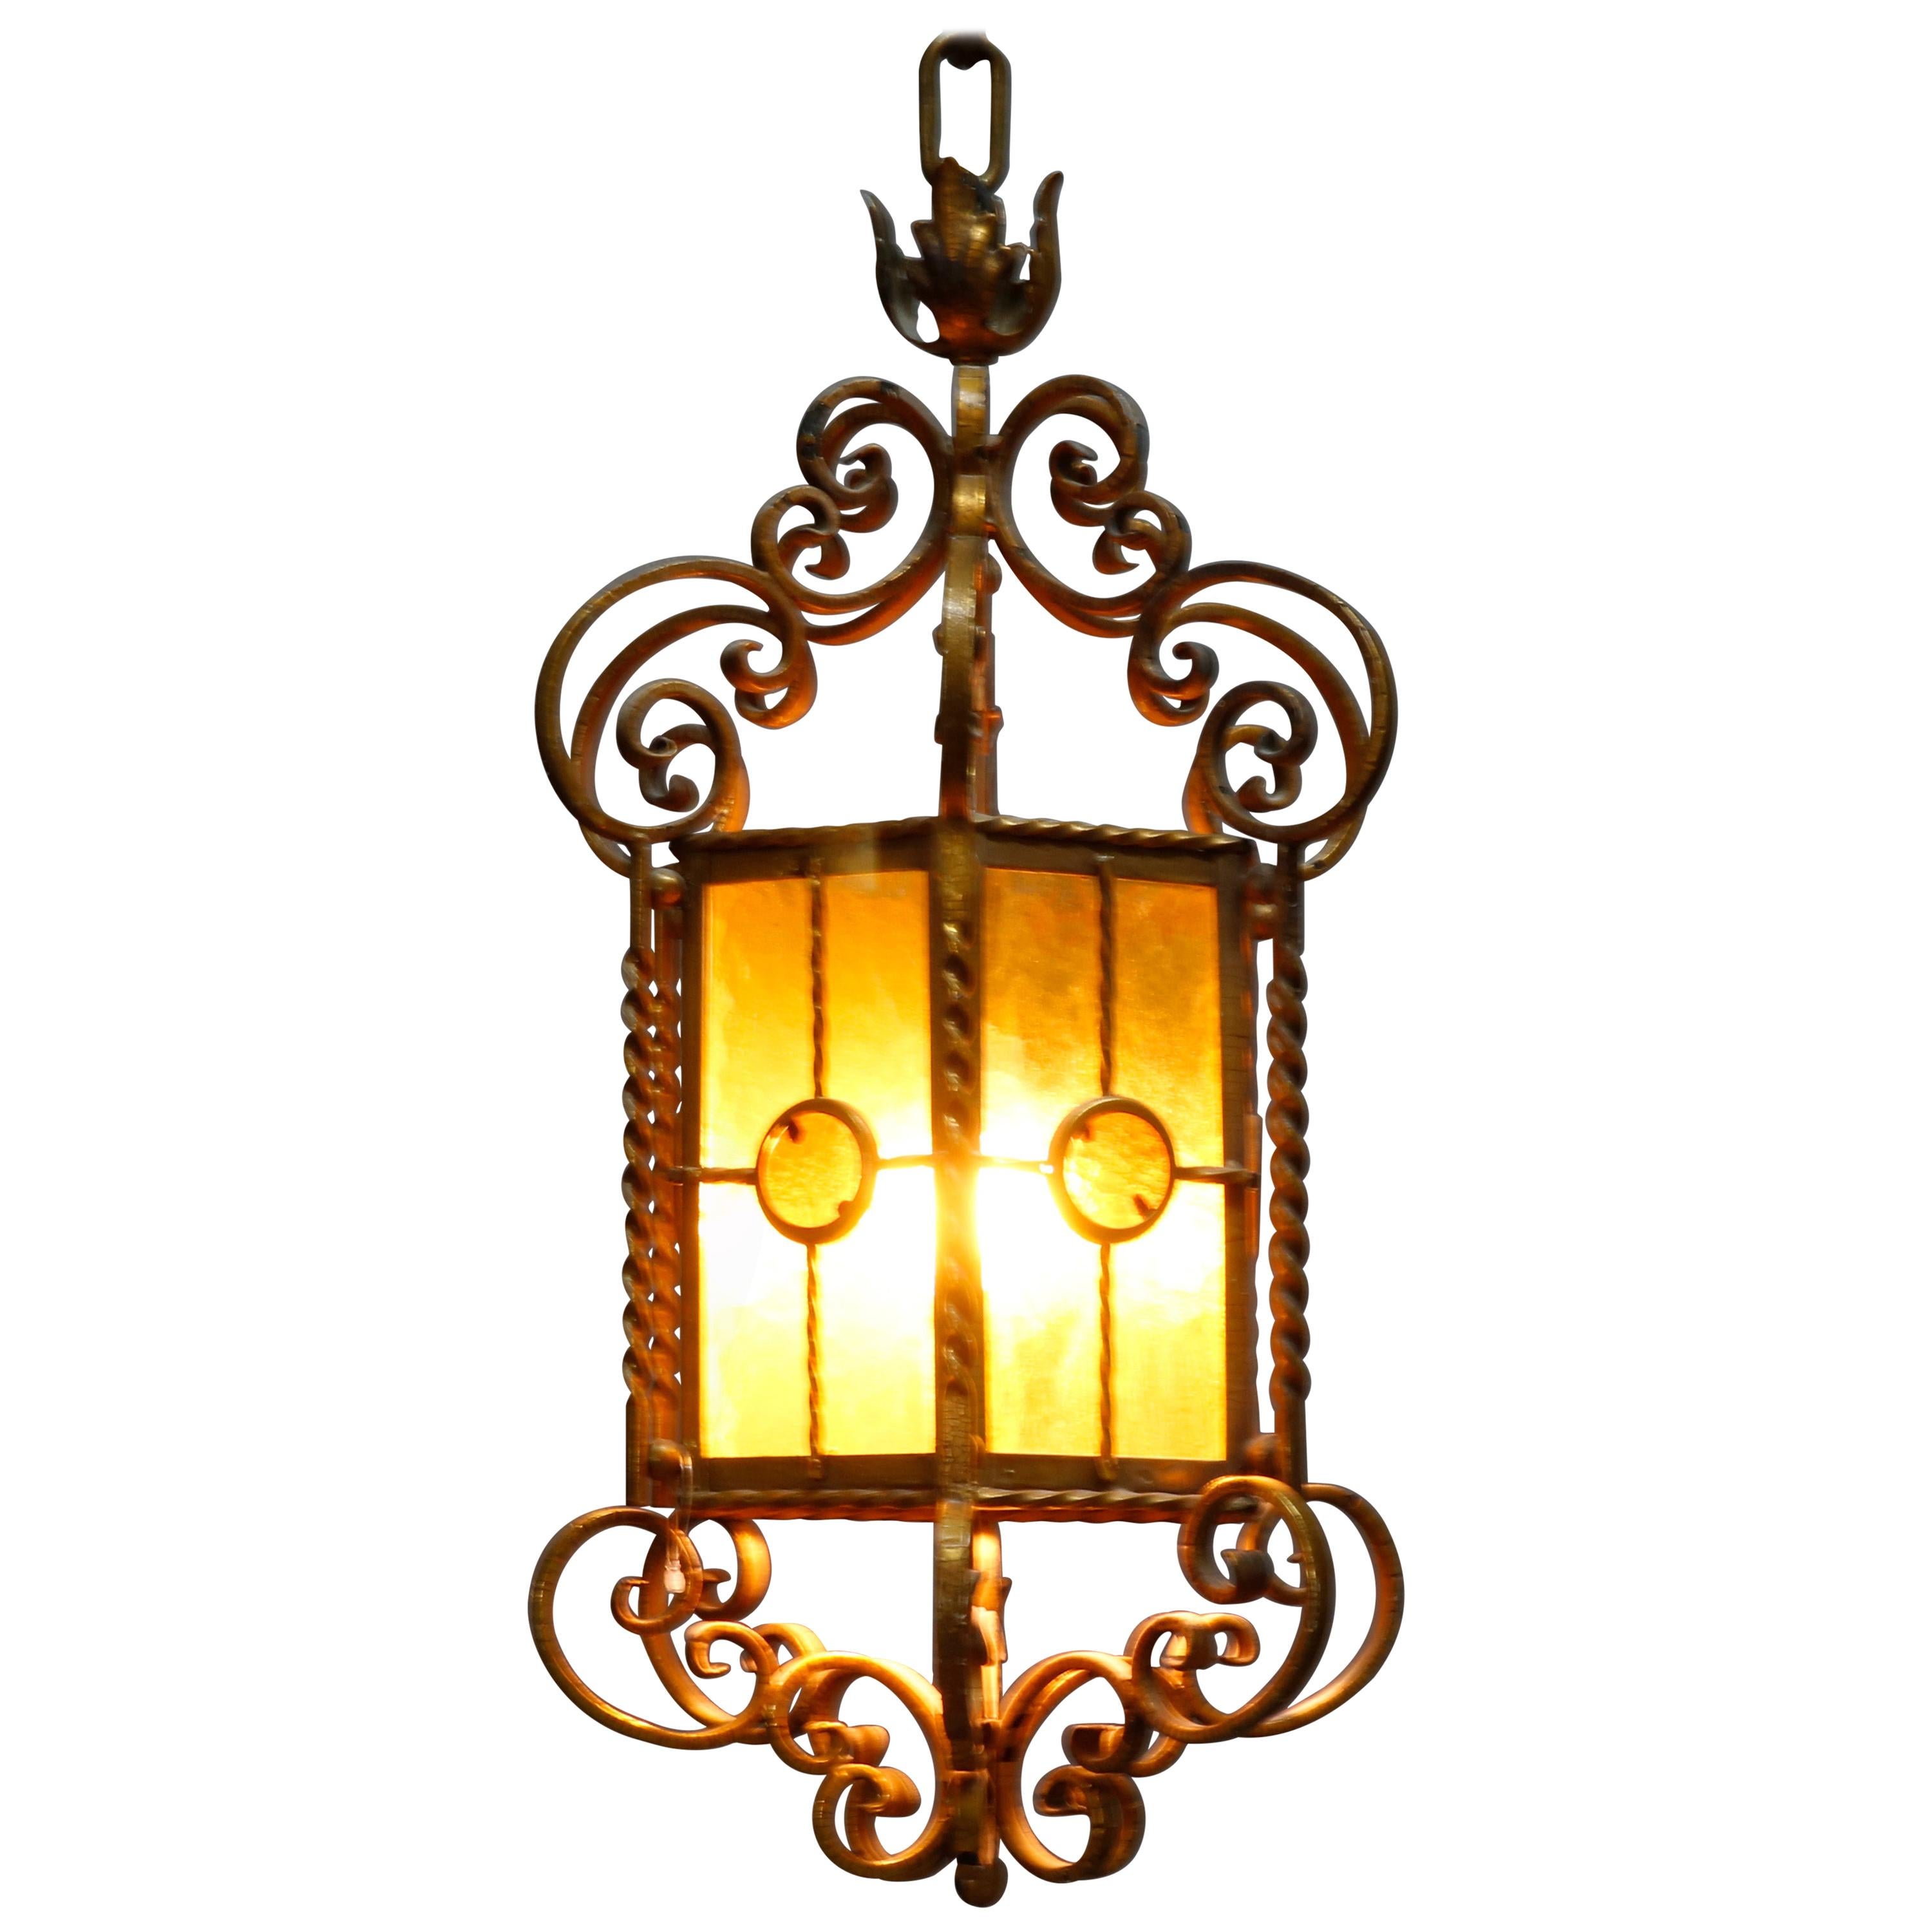 Antique Continental Wrought Iron and Art Glass Hanging Pendant Light, circa 1920